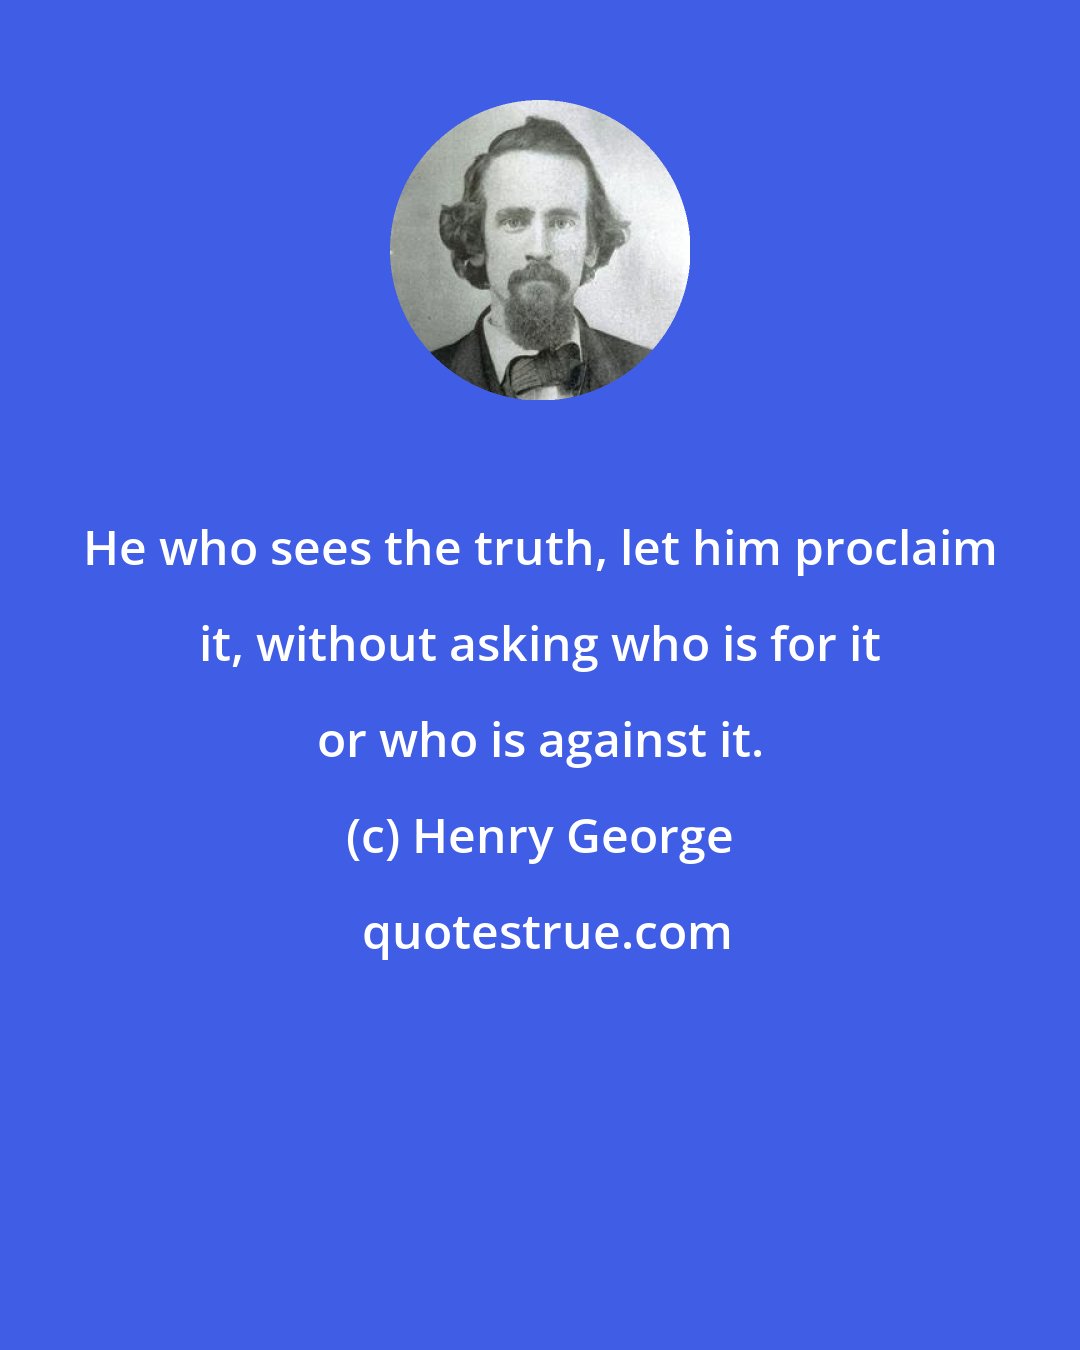 Henry George: He who sees the truth, let him proclaim it, without asking who is for it or who is against it.